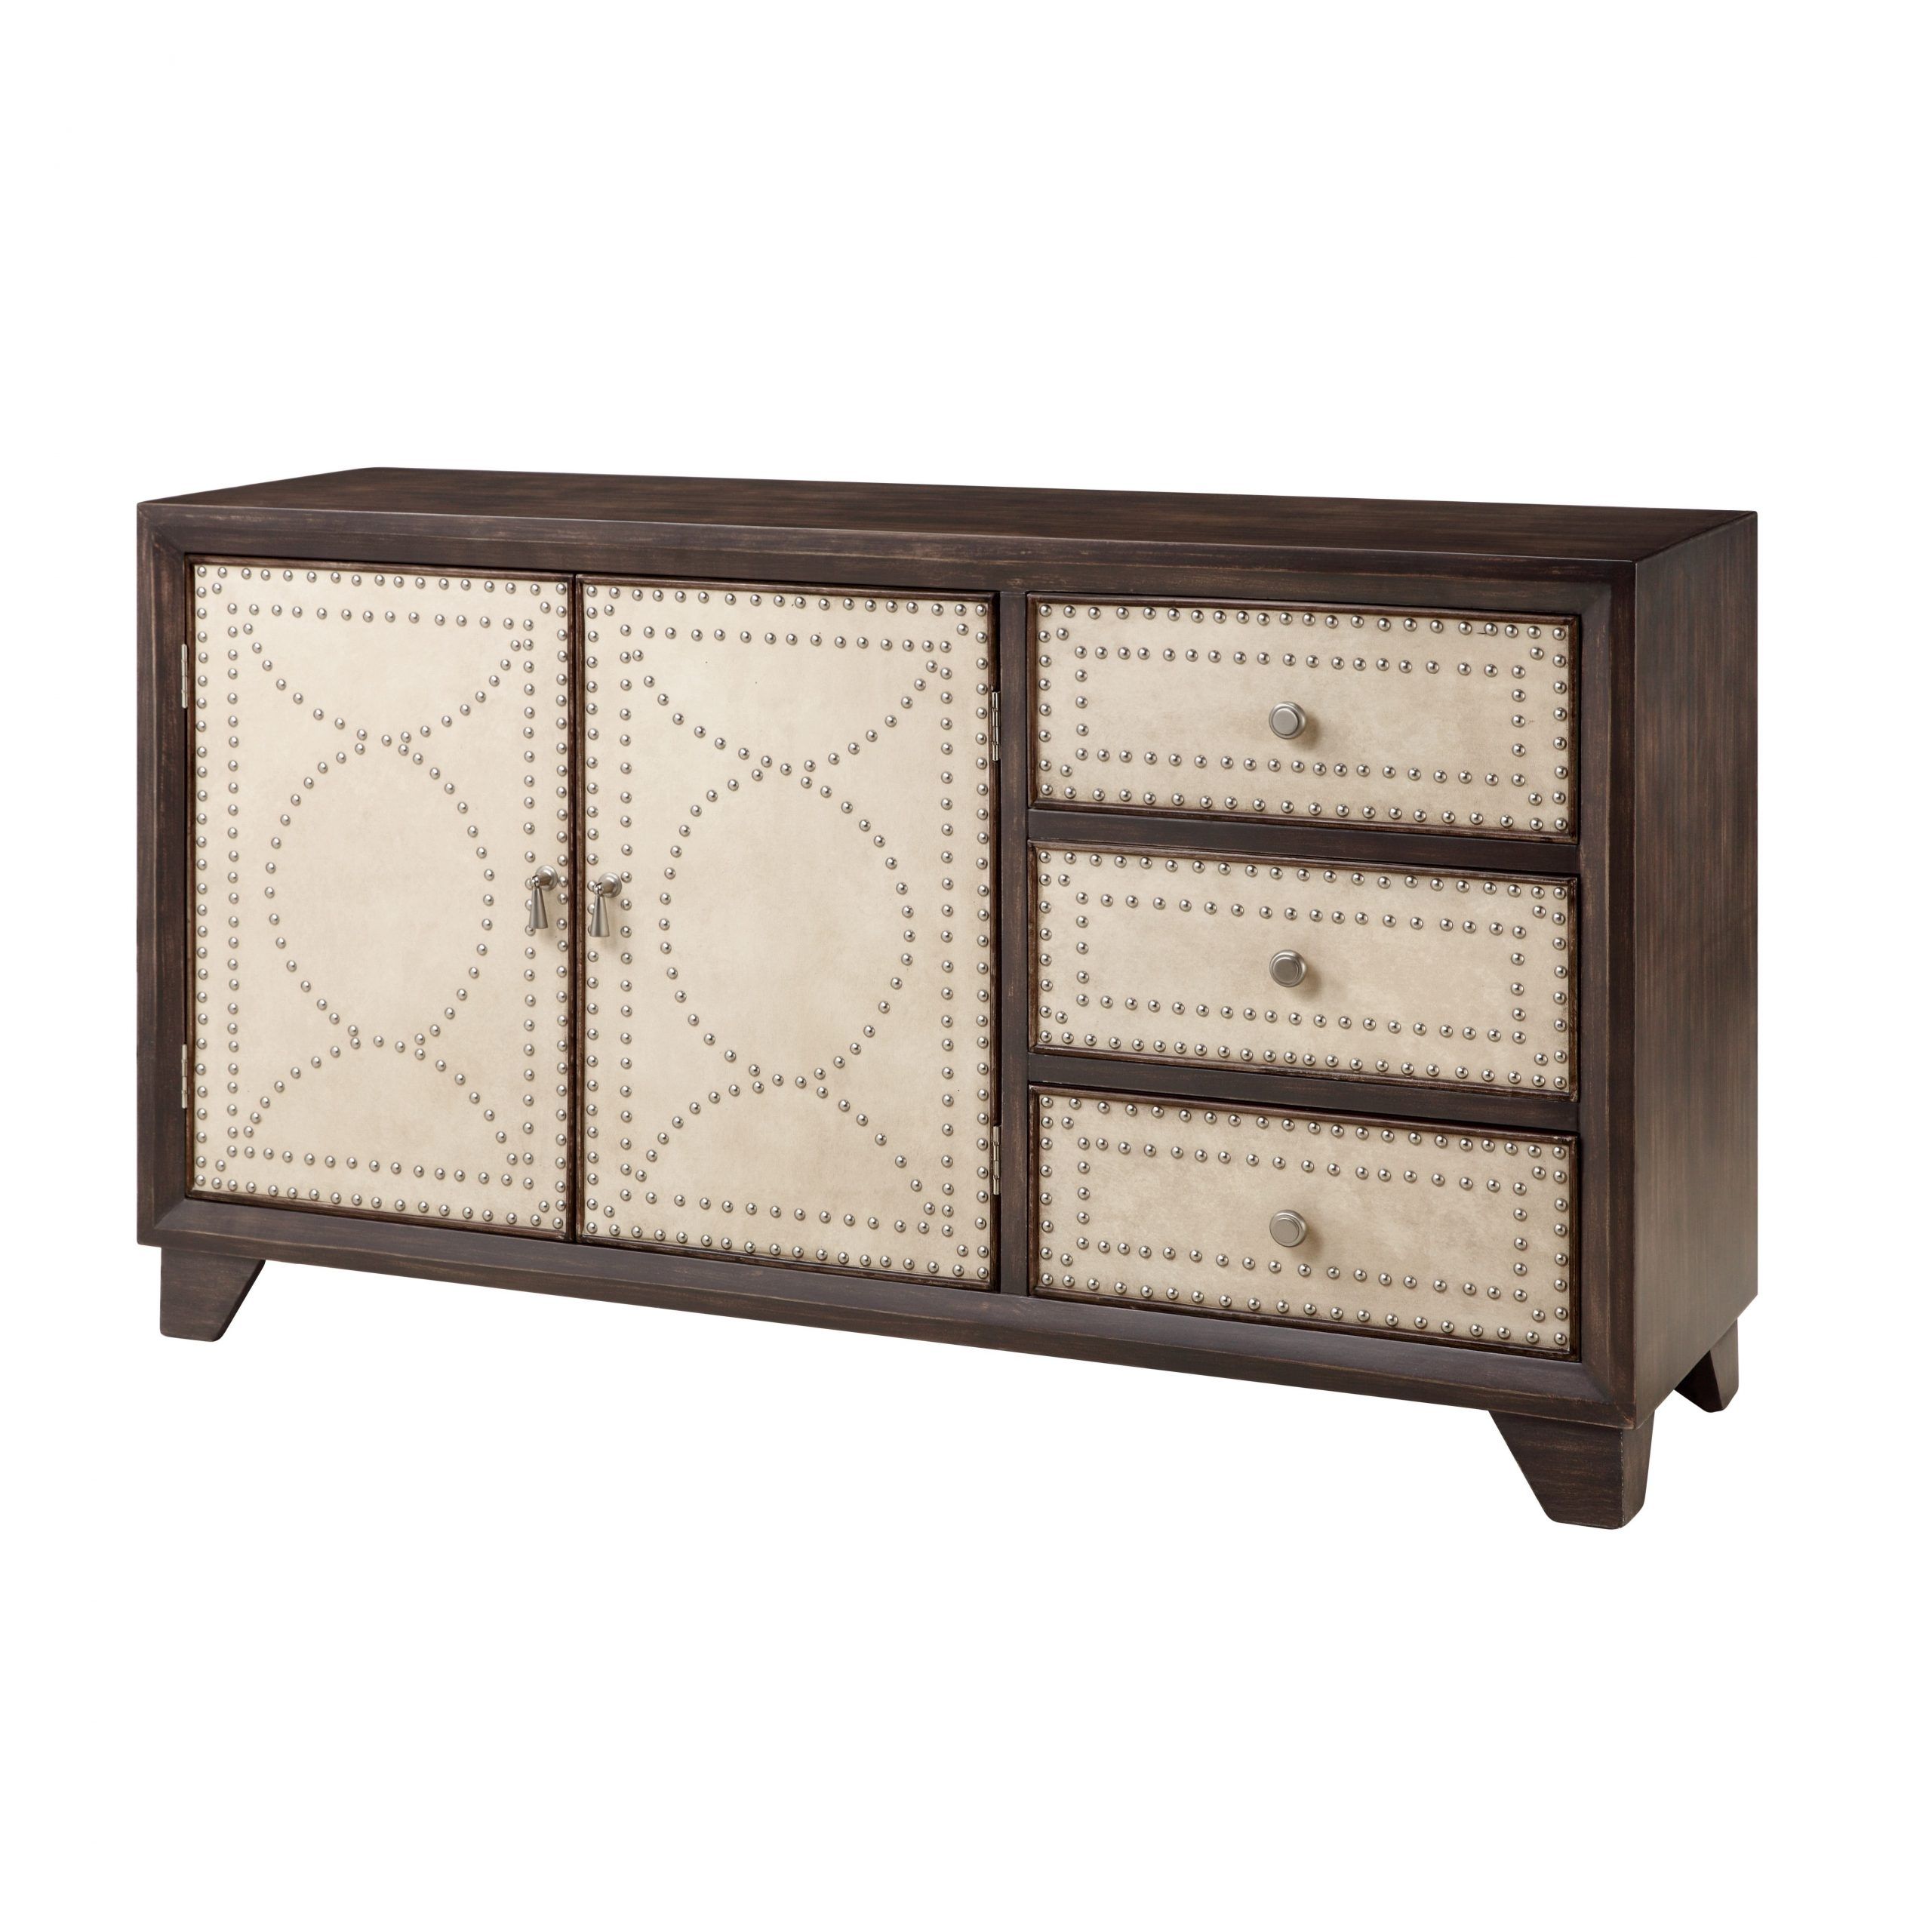 Stein World Collette Sideboard. 60" Wide (View 17 of 20)